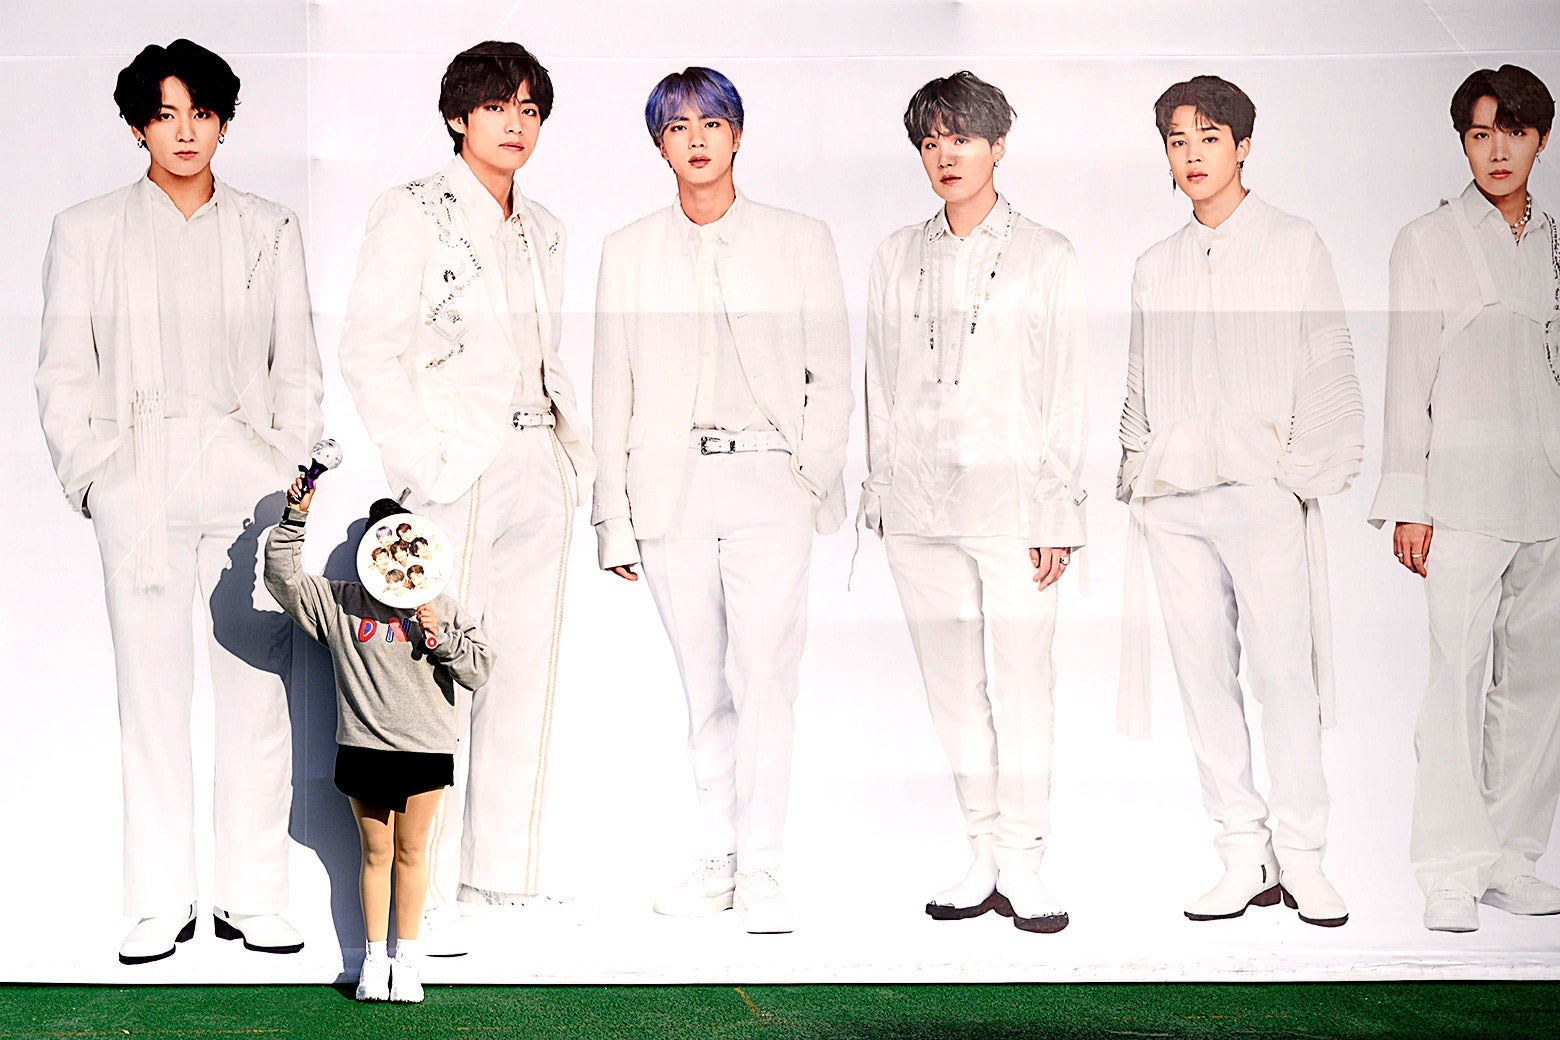 A fan poses for photos in front of a large image of BTS